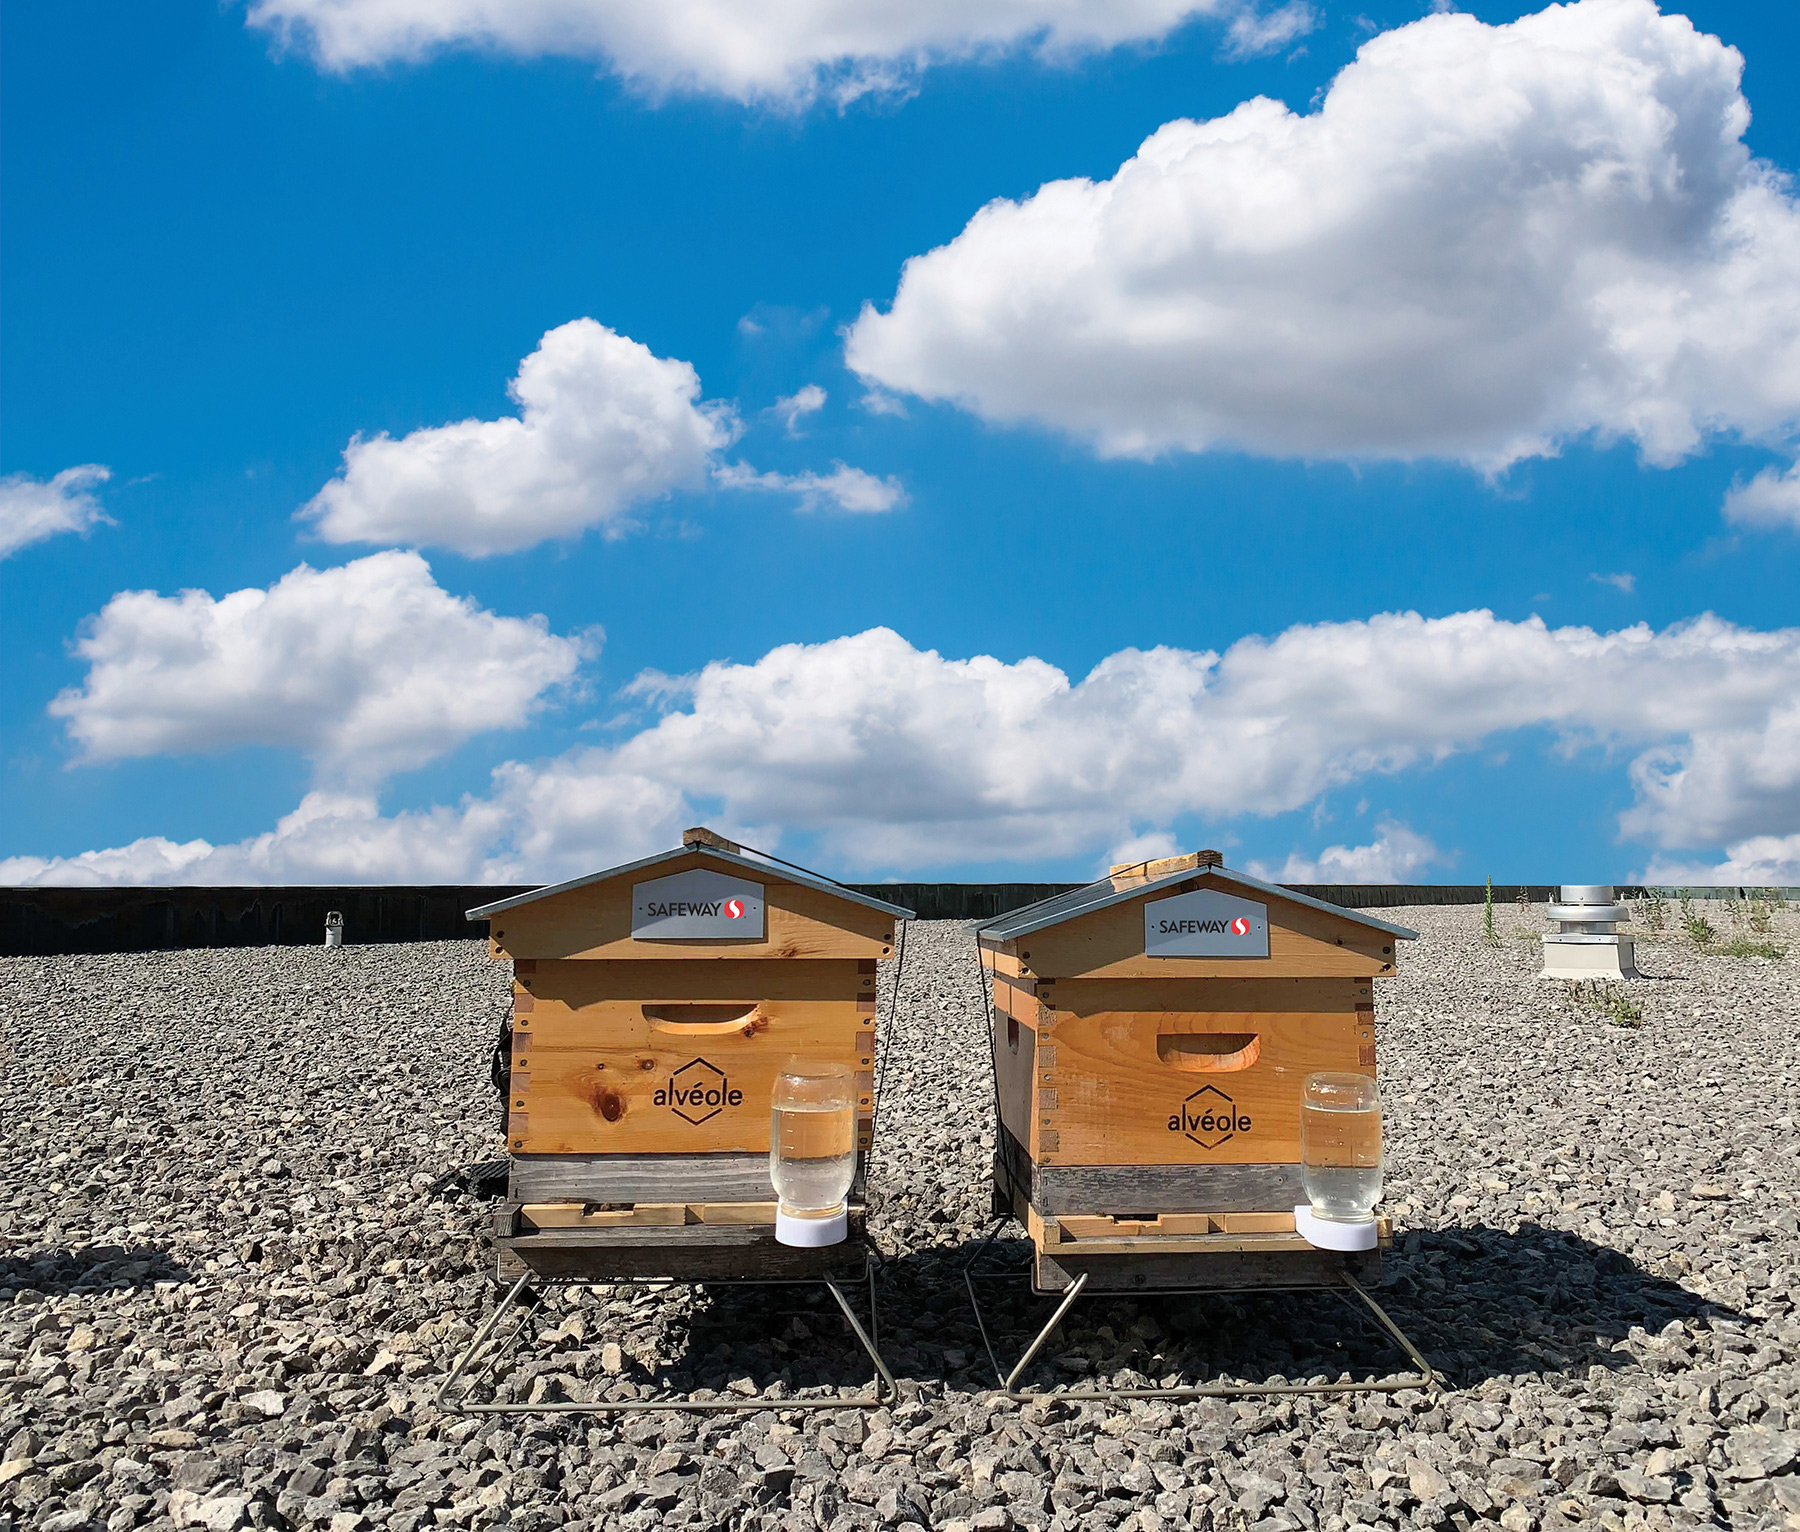 Sobeys and AlvÃ©ole are beekeeping in the city with two beehives side-by-side in a towering city centre on a sunny day.